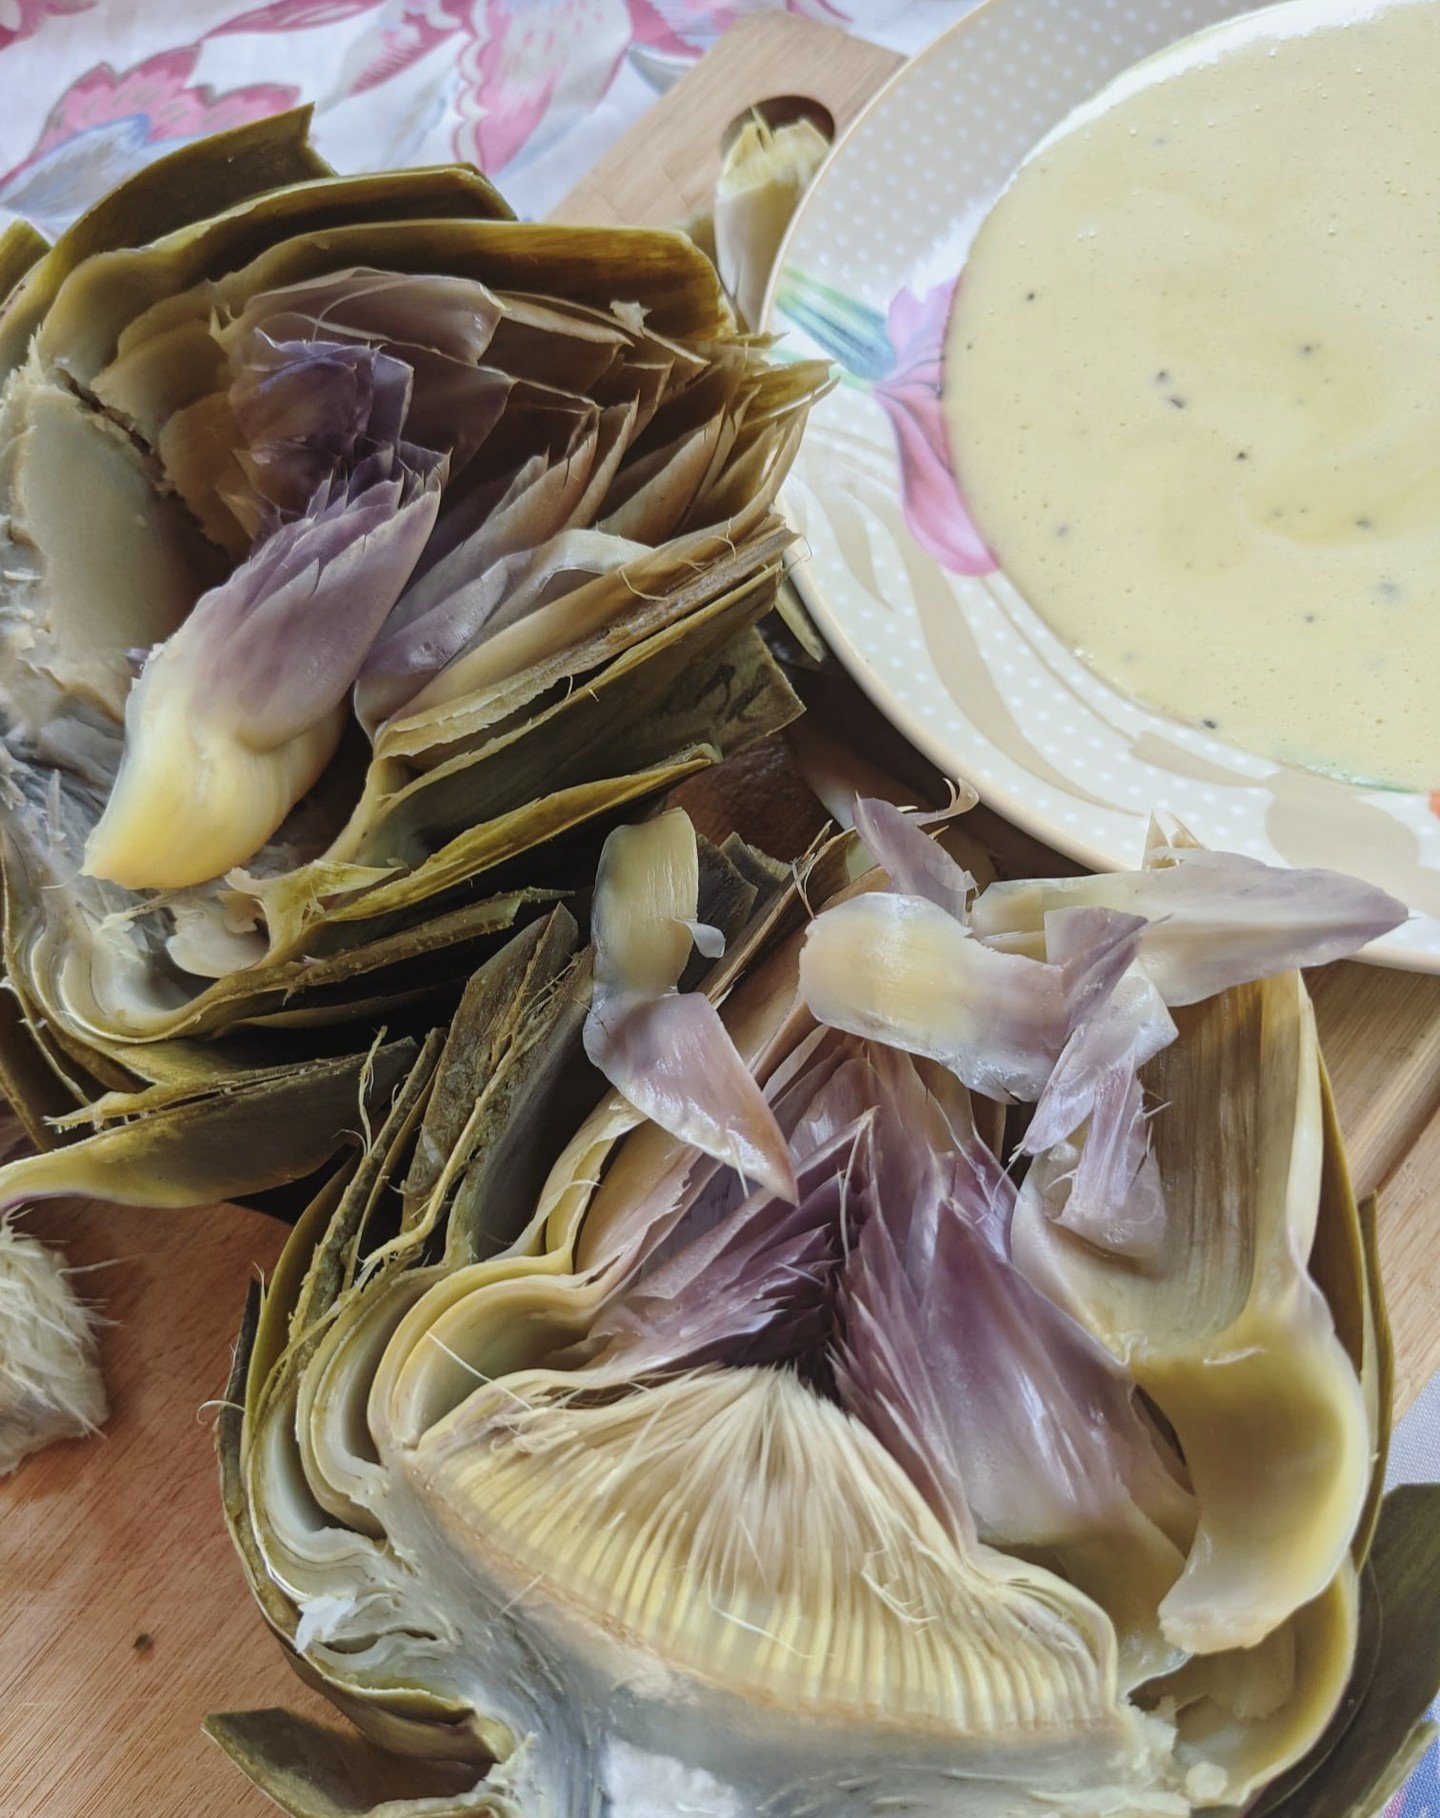 The Cretans like to eat artichokes raw, fresh off the shrub, cut on the stone walls of their craggy farms in a restful moment of reward and contemplation. Vibrant and bitter tempered by the juice of warm lemons picked from a neighbouring tree and a d